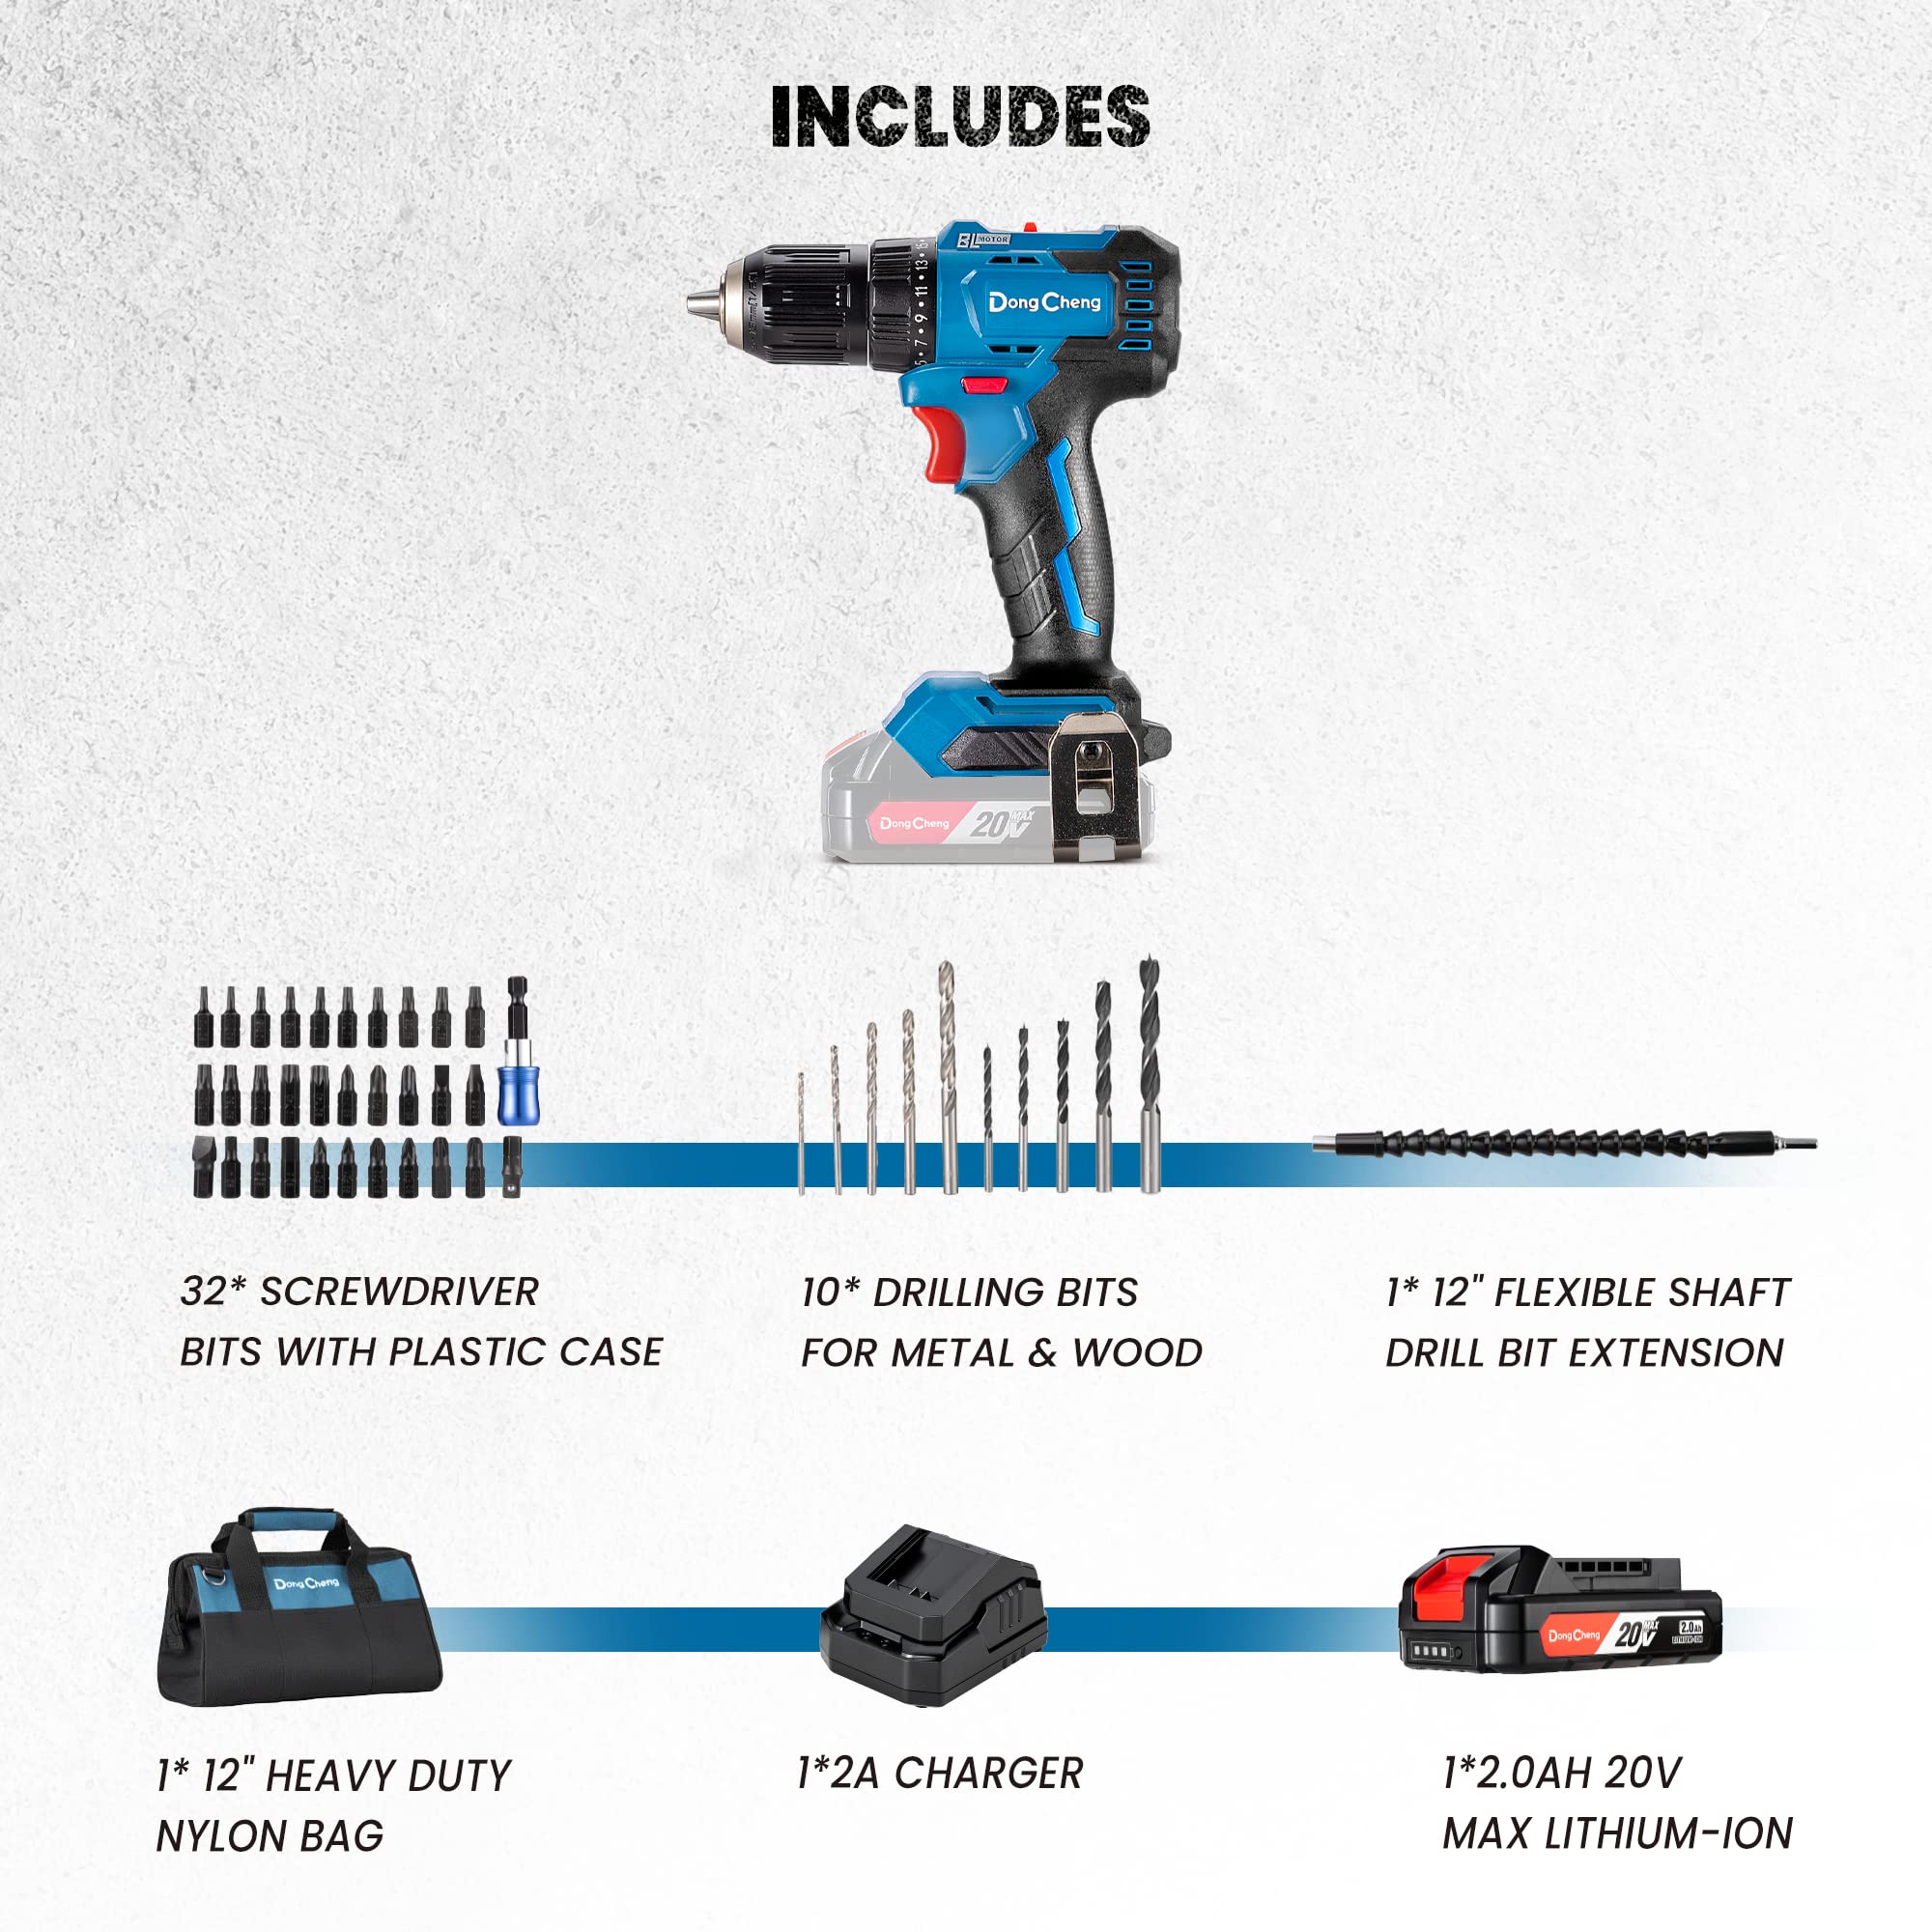 DongCheng Cordless Drill Driver 20V Max,1/2” Keyless Chuck Brushless Power Drill (0-600/2000RPM) with 42pcs Drilling/Driver Kit, 2.0 Ah Li-ion Battery and Fast Charger, DCJZ2050